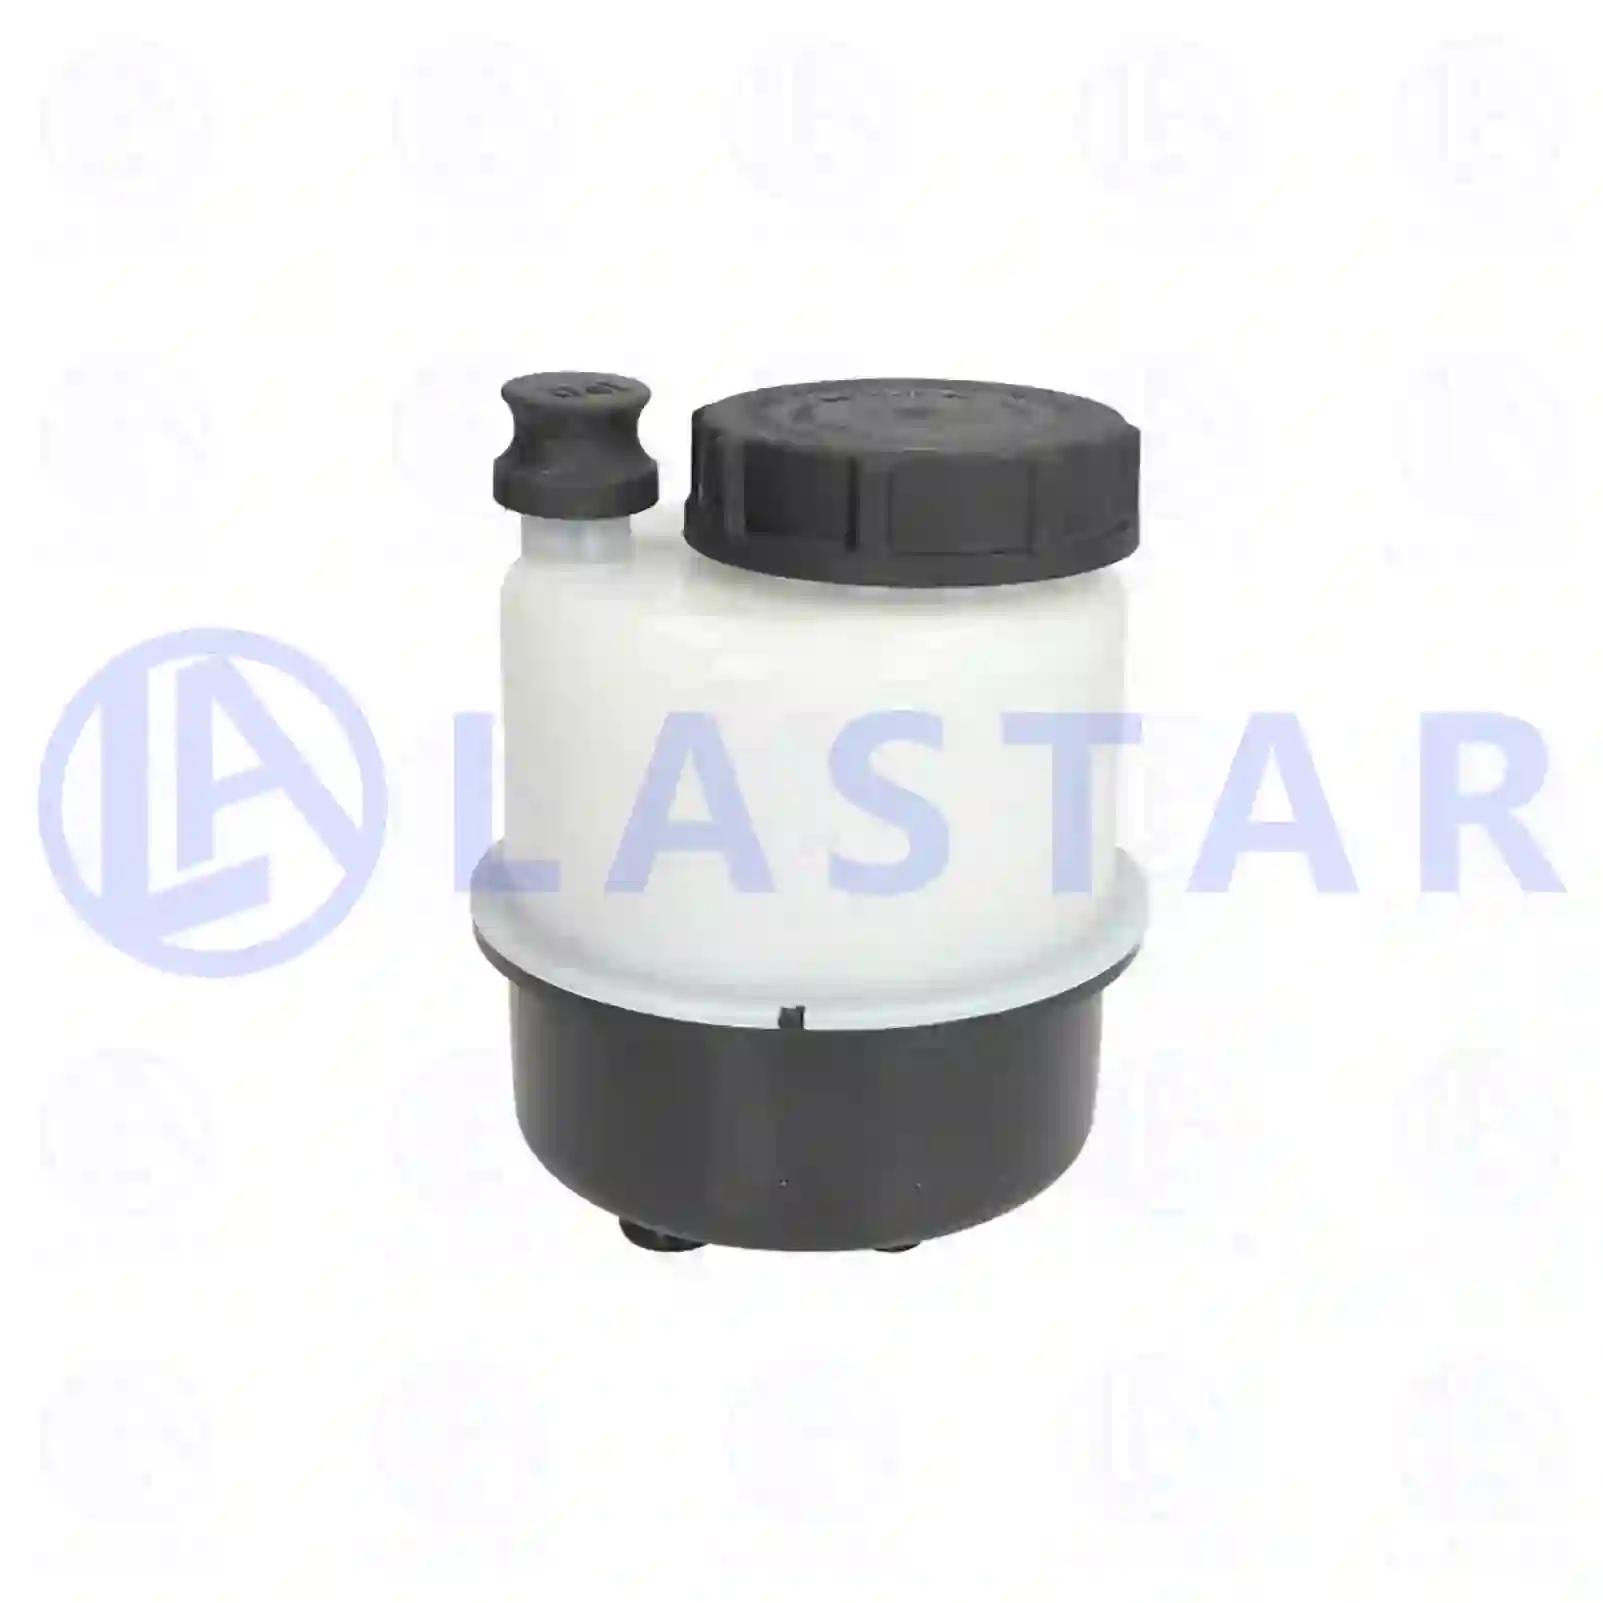 Oil container, with filter, 77705226, 81473016047, 6954667102, 1076236, ZG03041-0008 ||  77705226 Lastar Spare Part | Truck Spare Parts, Auotomotive Spare Parts Oil container, with filter, 77705226, 81473016047, 6954667102, 1076236, ZG03041-0008 ||  77705226 Lastar Spare Part | Truck Spare Parts, Auotomotive Spare Parts